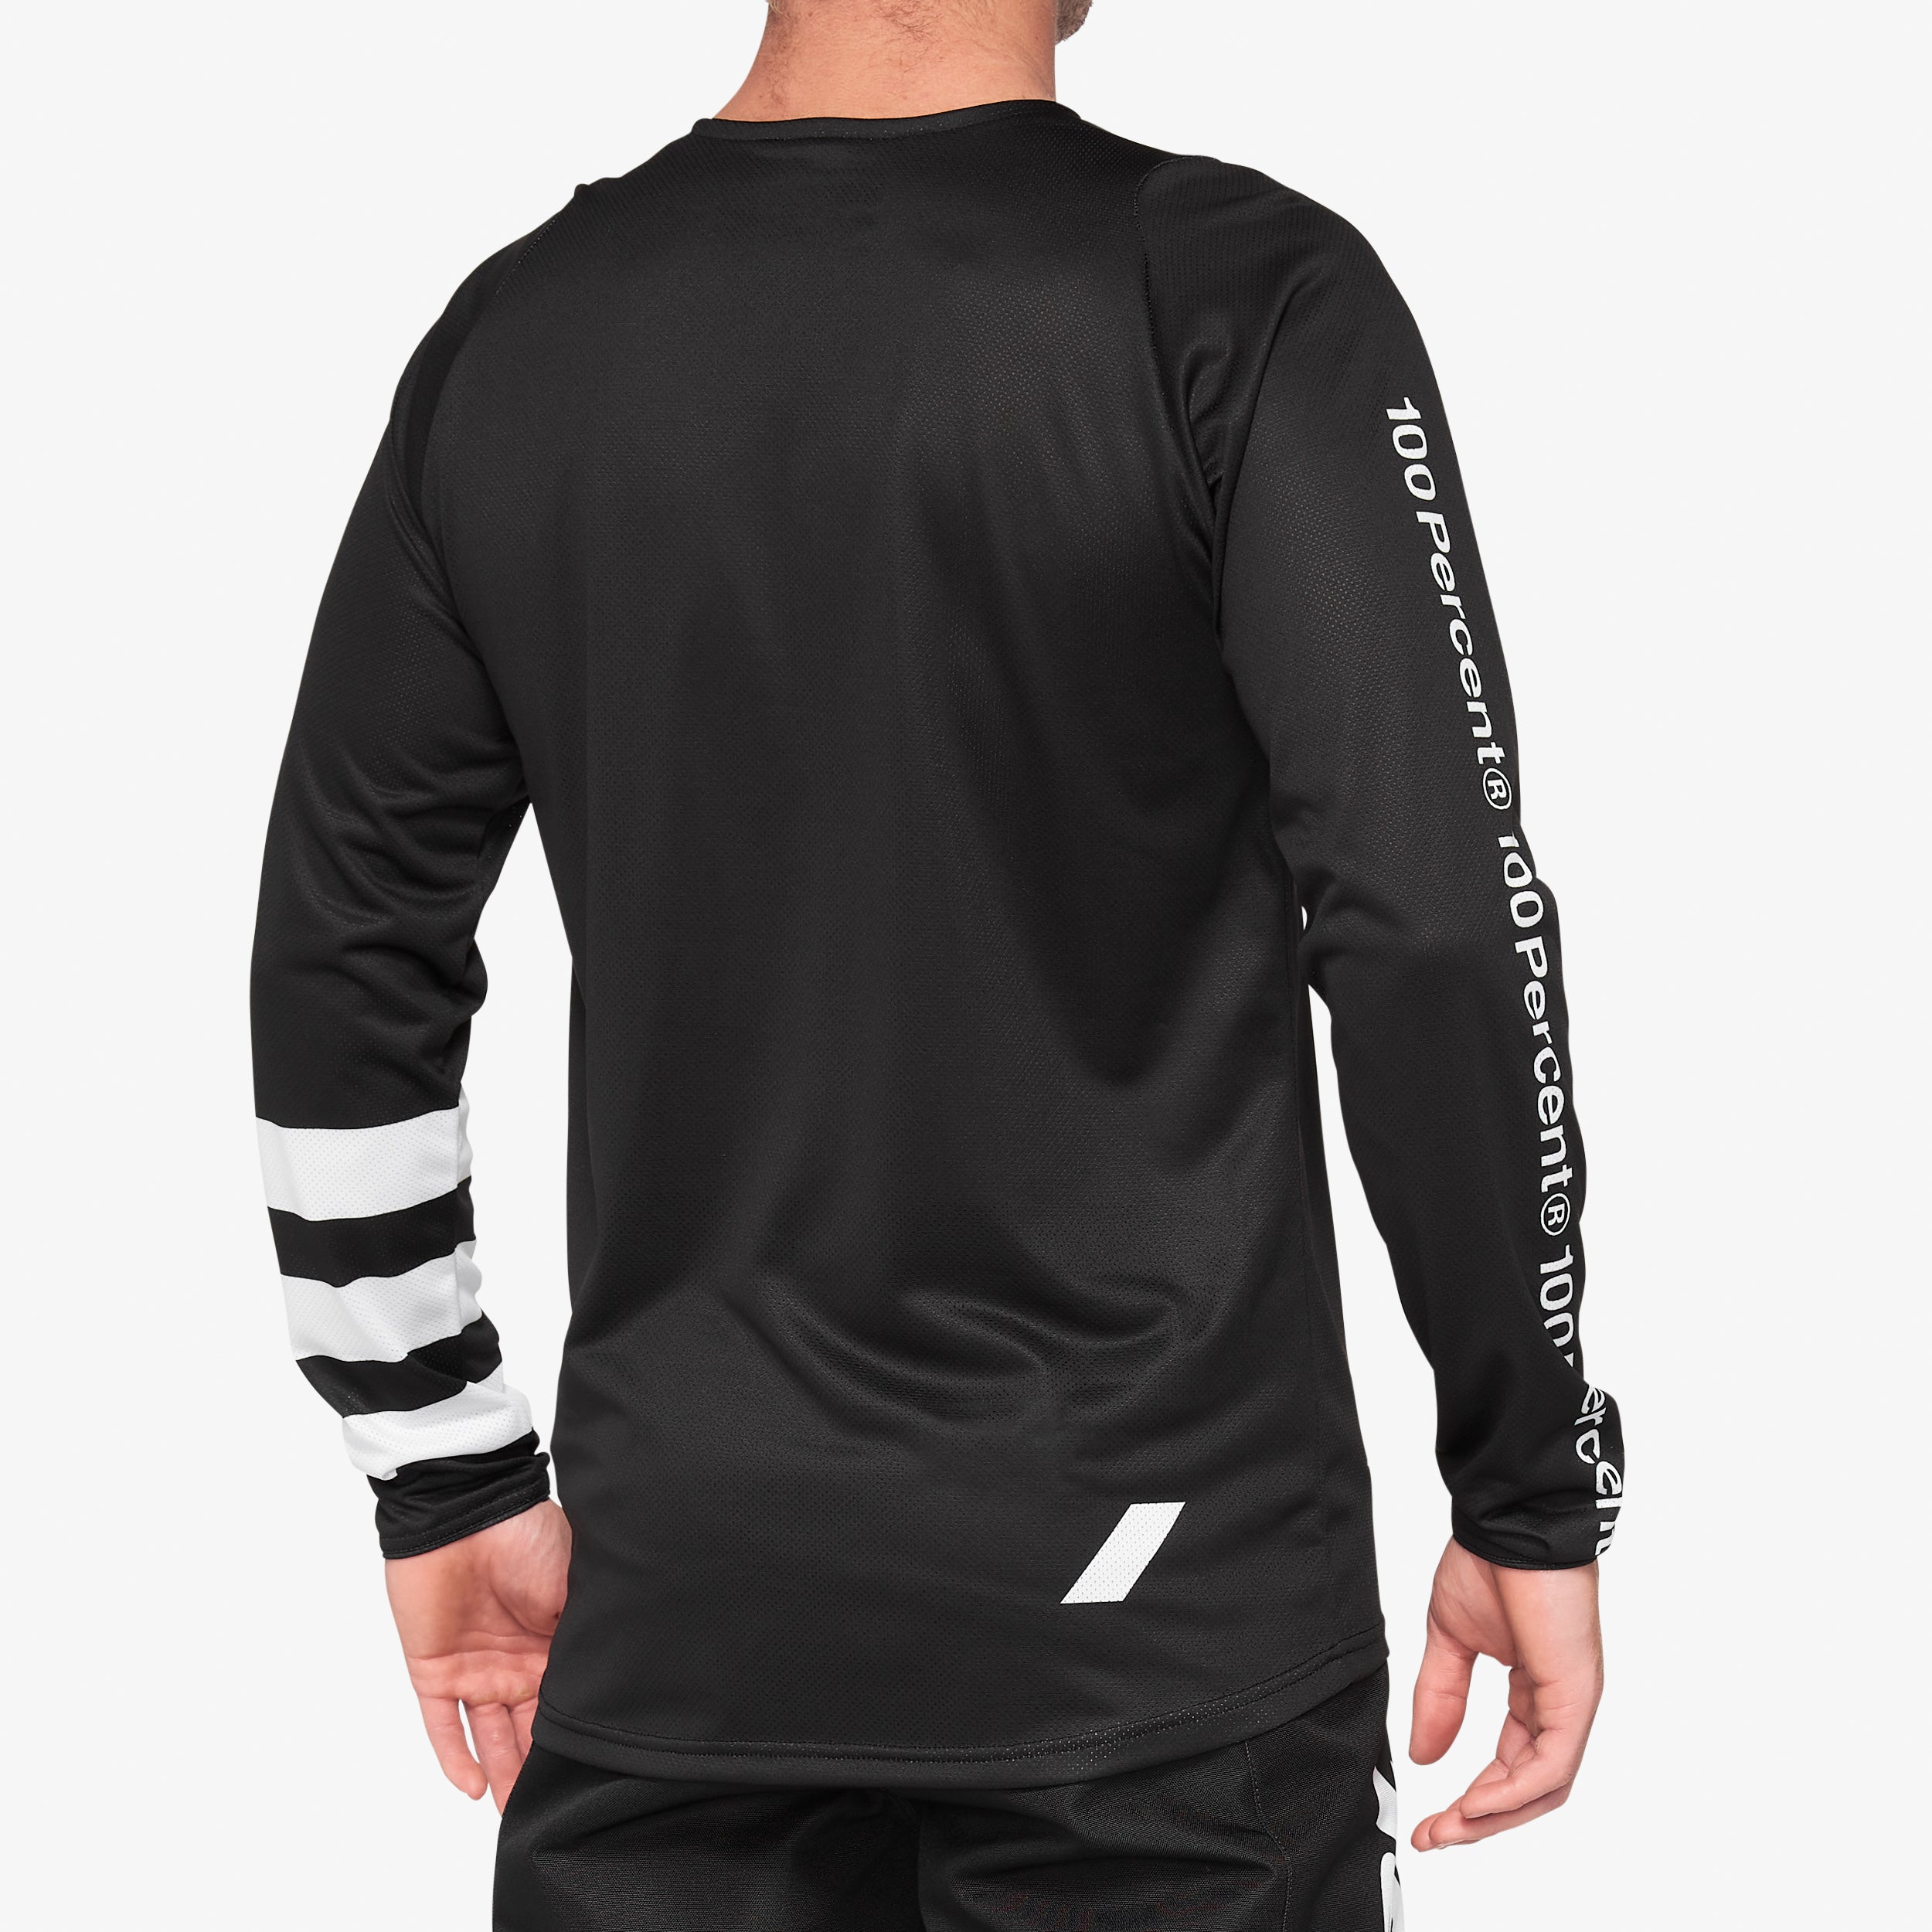 R-CORE Youth Long Sleeve Jersey Black/White - Secondary